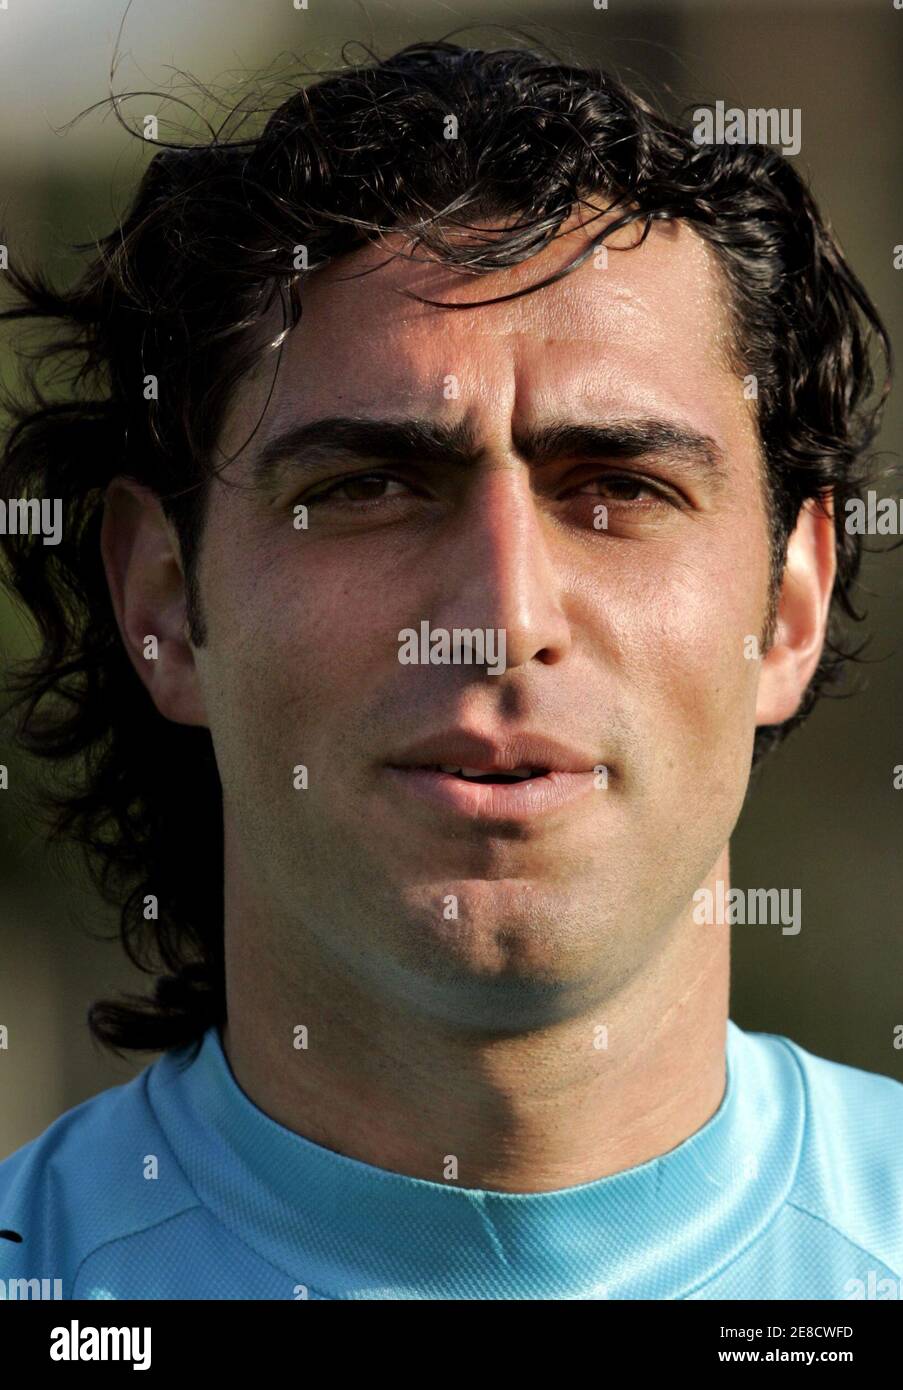 Hassan Roudbarian of Iran attends a soccer practice session at the Azadi sport complex in Tehran, Iran May 23, 2006.     WORLD CUP 2006 PREVIEW HEADSHOTS        REUTERS/Raheb Homavandi Stock Photo